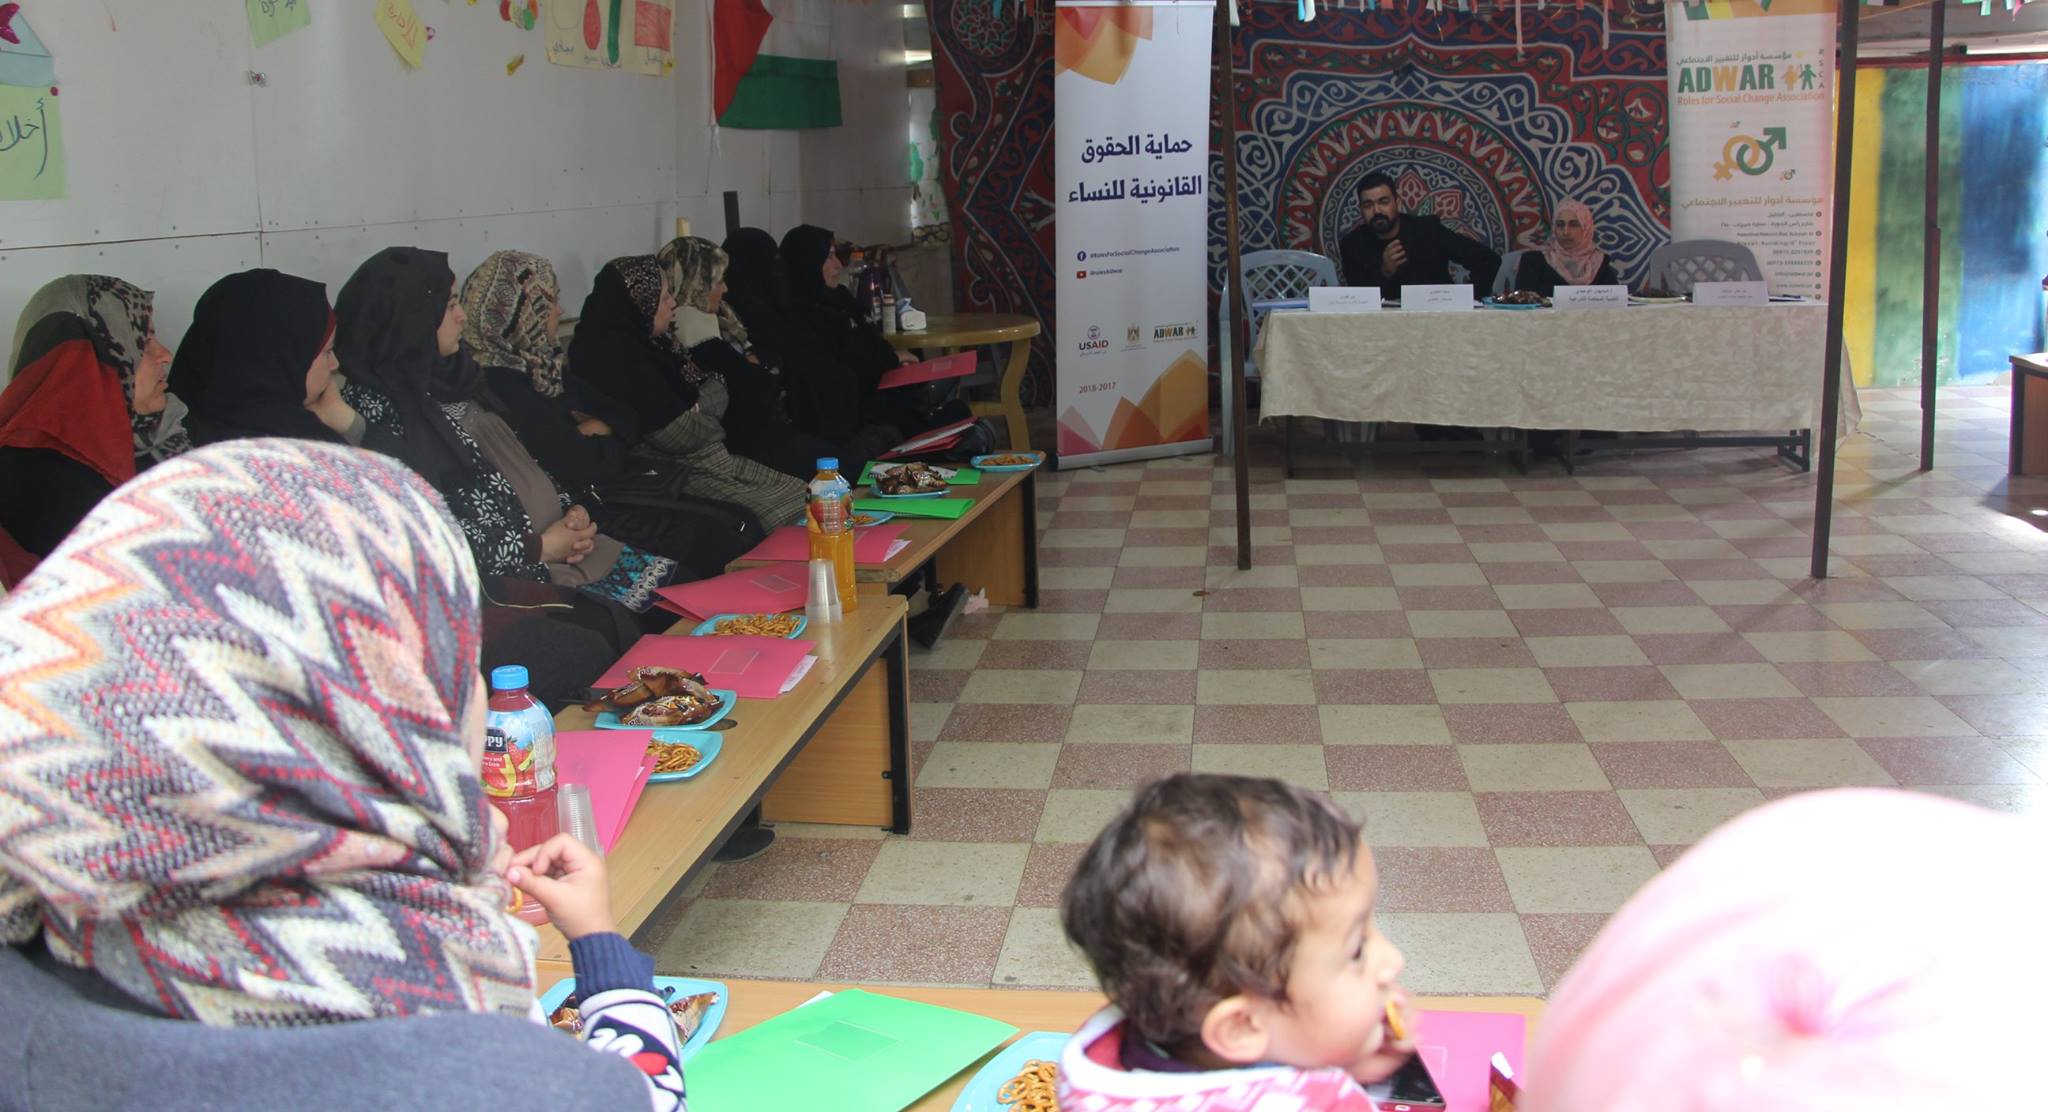  ADWAR finished the first activities within the project entitled (Protecting Women Legal Rights)